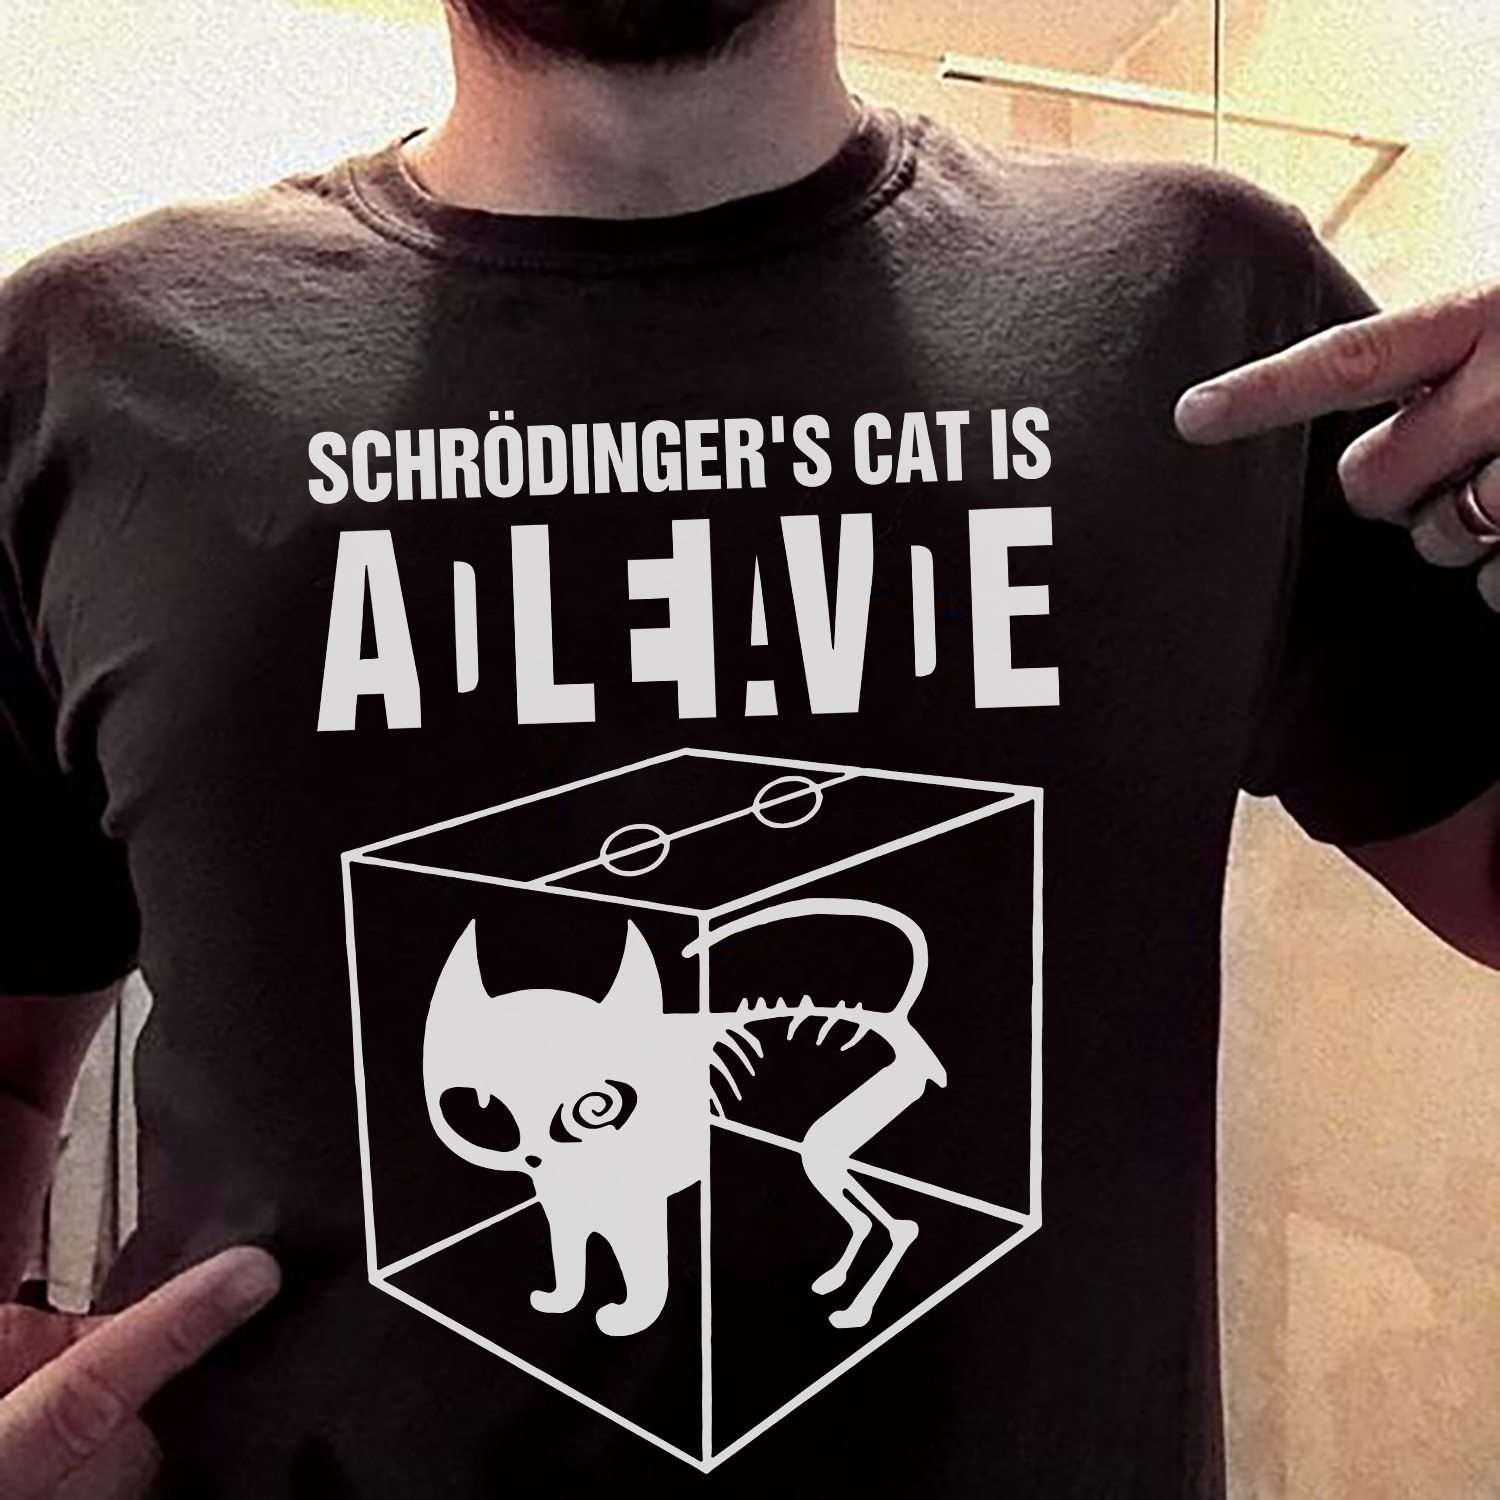 Schrodinger's cat is alive - Cat paradox, gift for cat person